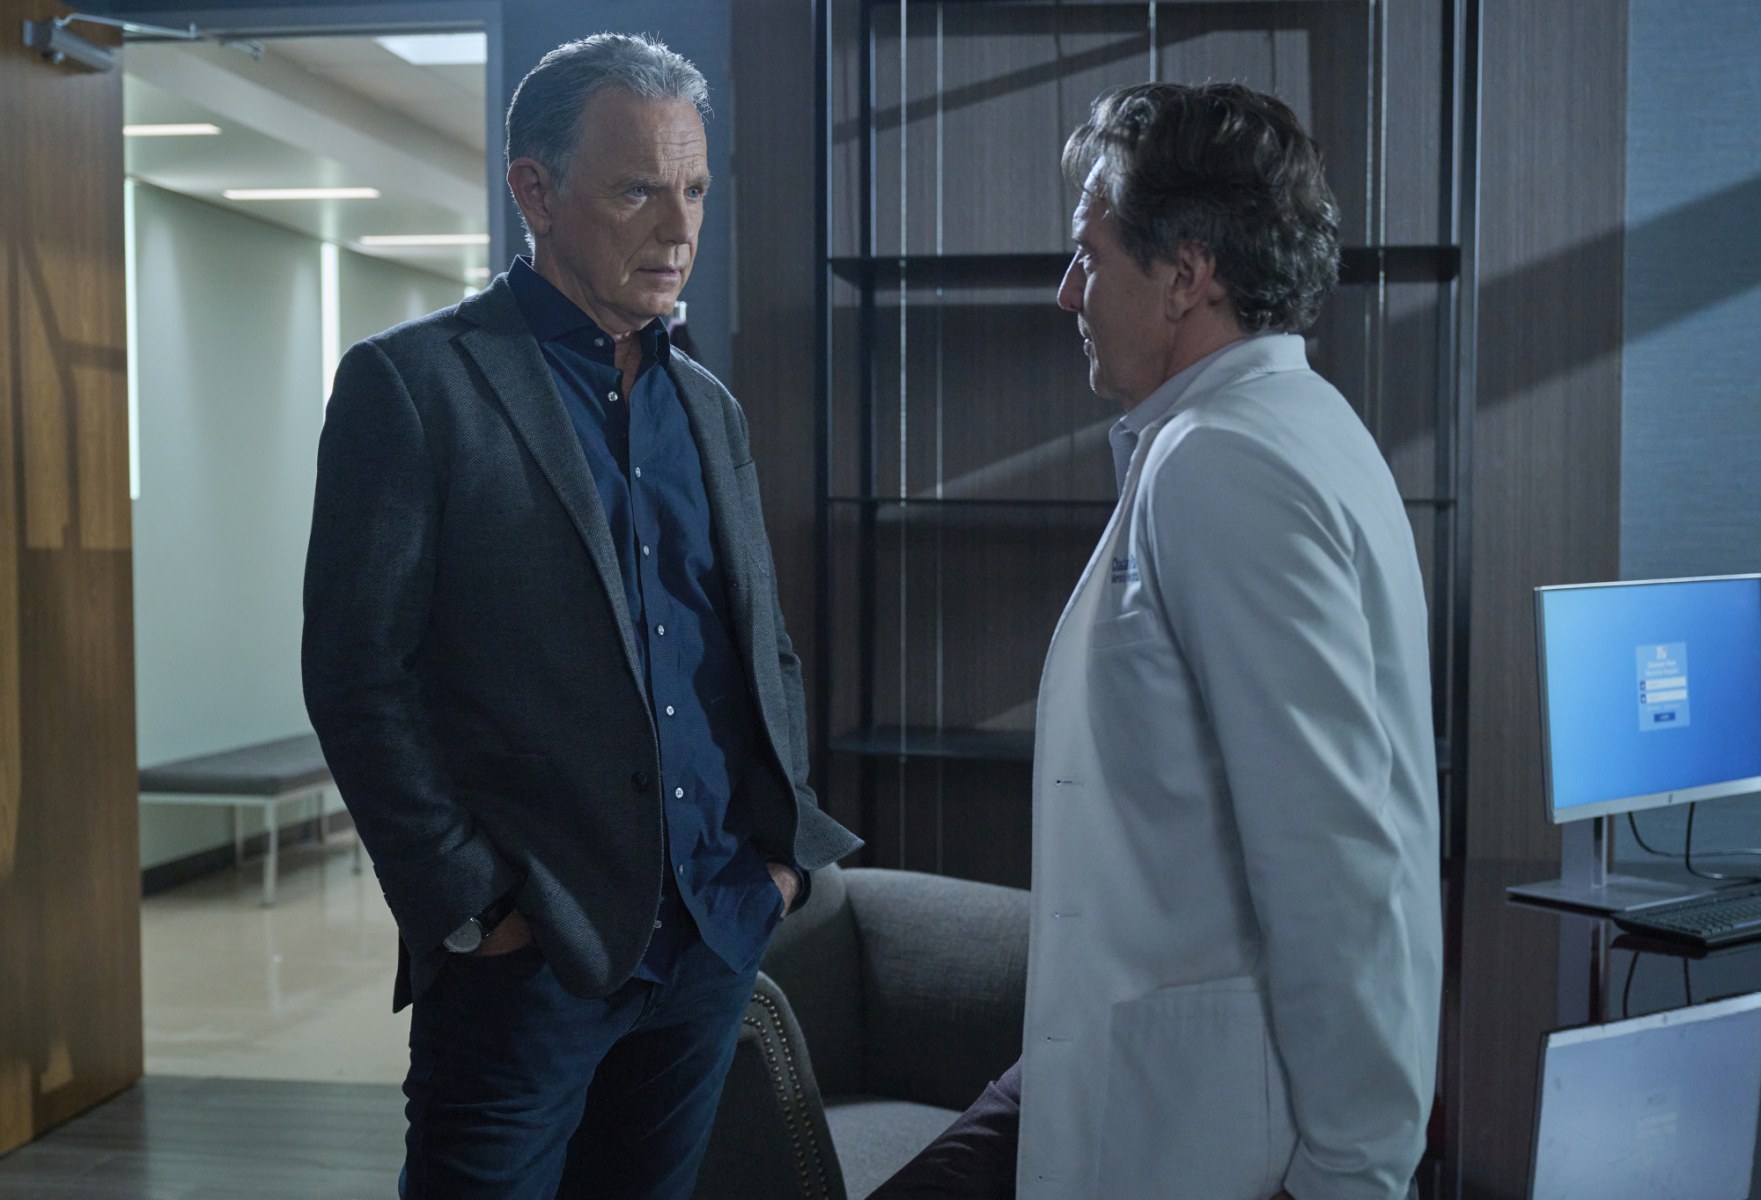 THE RESIDENT: L-R: Bruce Greenwood and Andrew McCarthy in the "All Hands on Deck" season finale episode of THE RESIDENT airing Tuesday, Jan. 17 (8:00-9:00 PM ET/PT) on FOX. ©2022 Fox Media LLC. CR: Tom Griscom/FOX